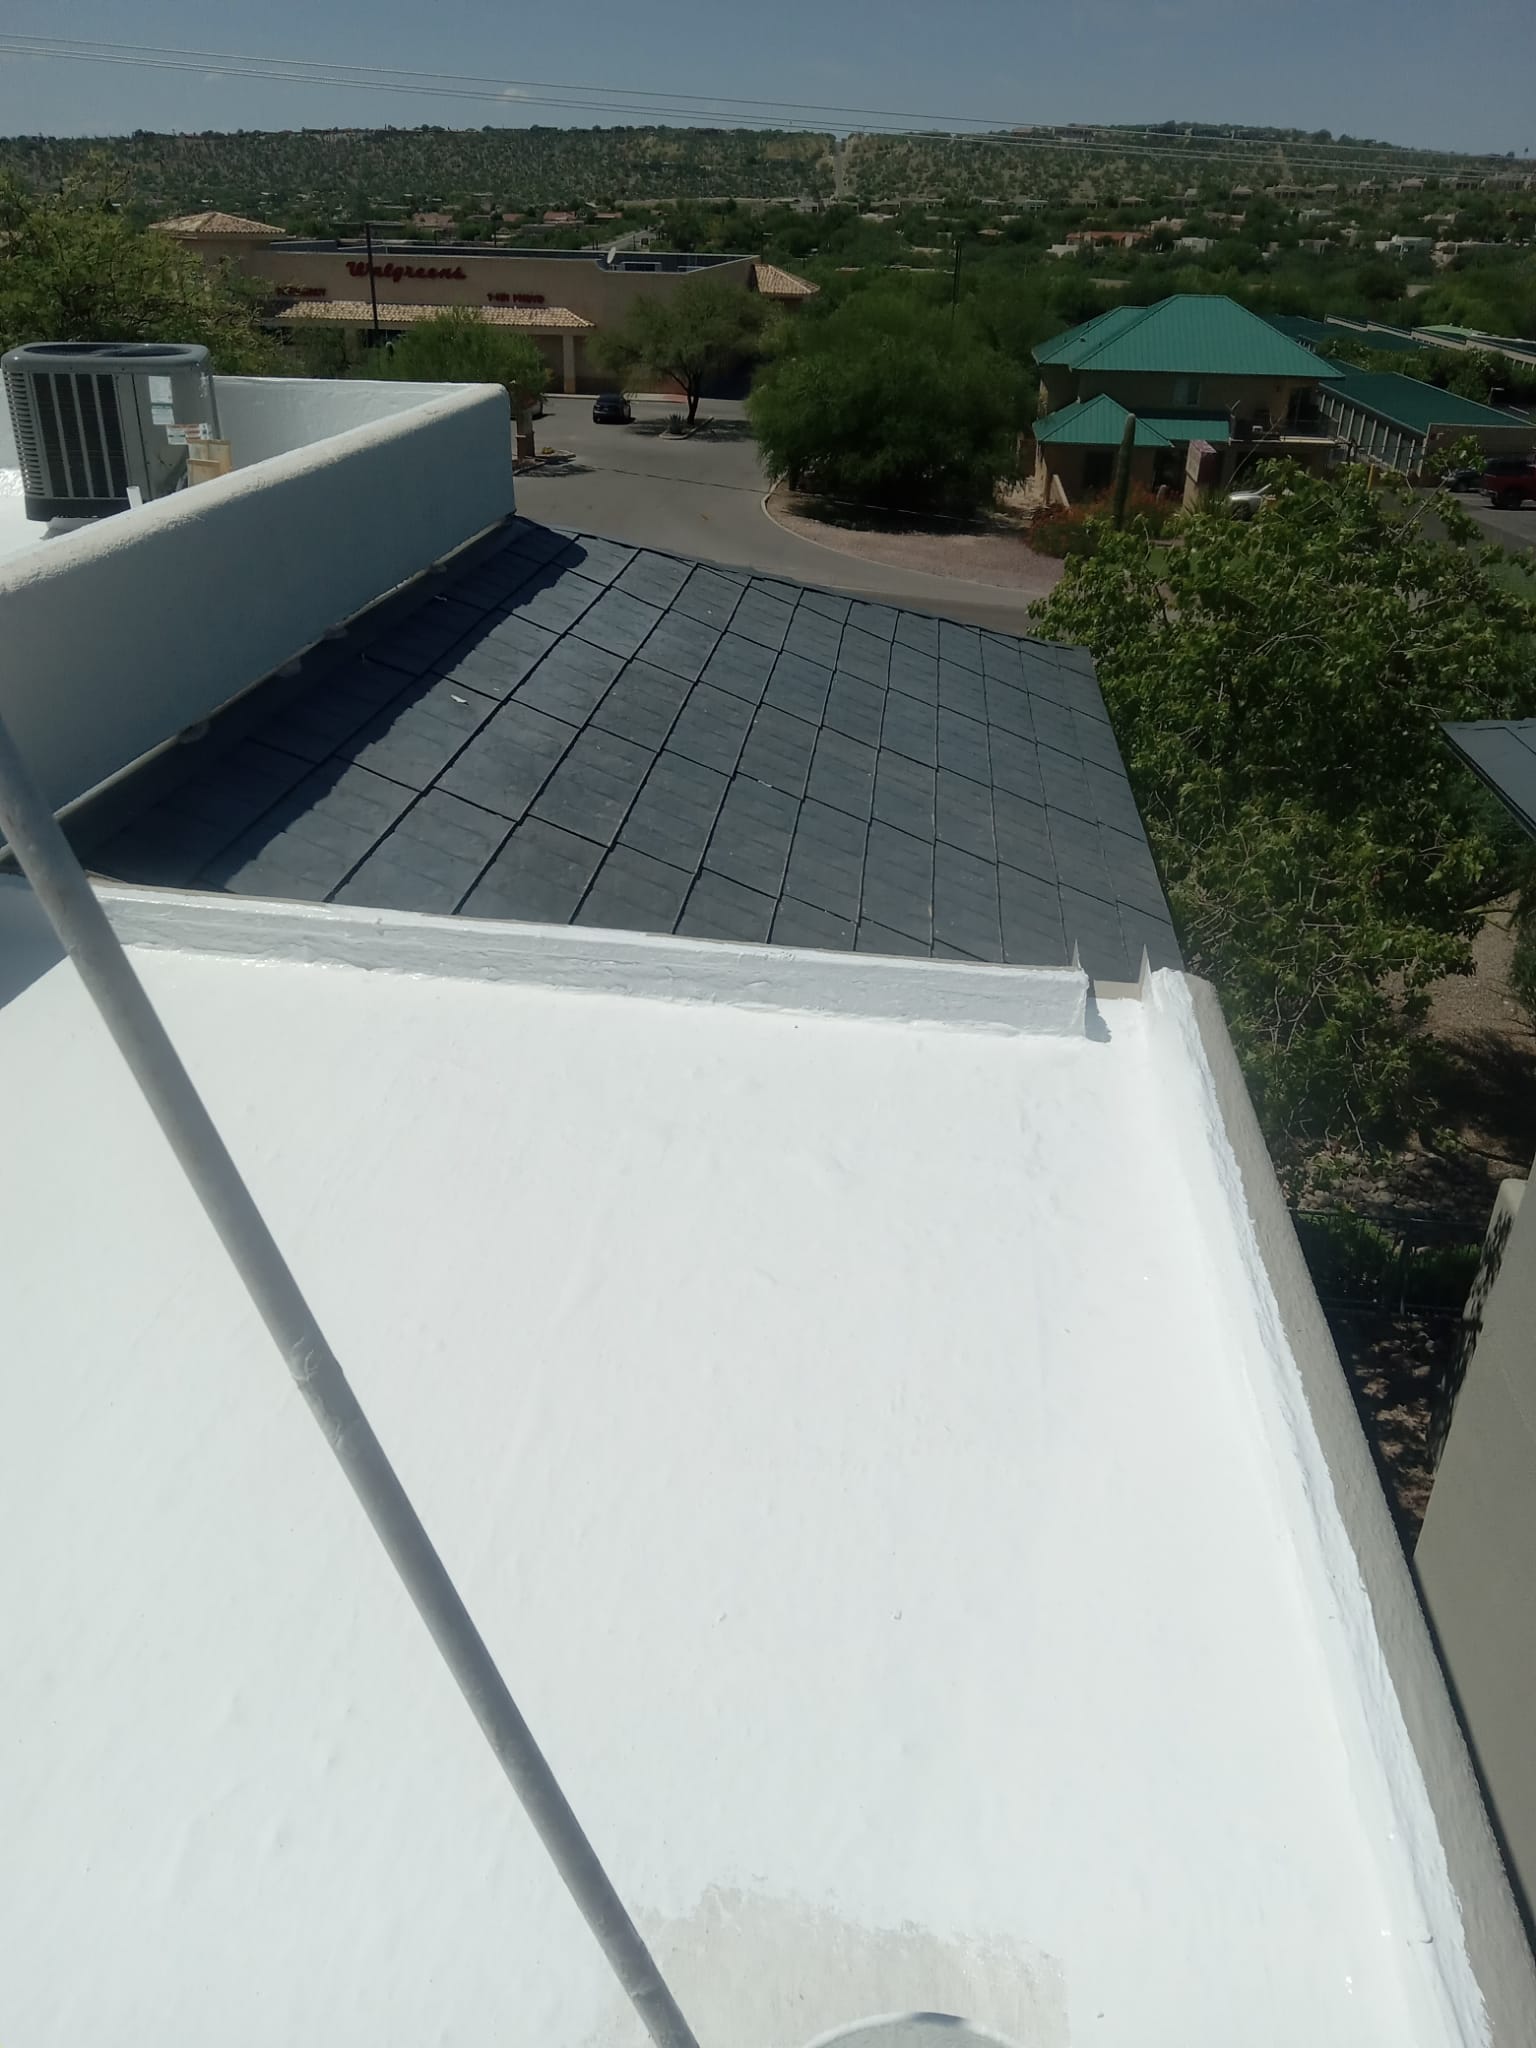 North Phoenix home featuring a roof with both spray foam insulation and traditional tiles.